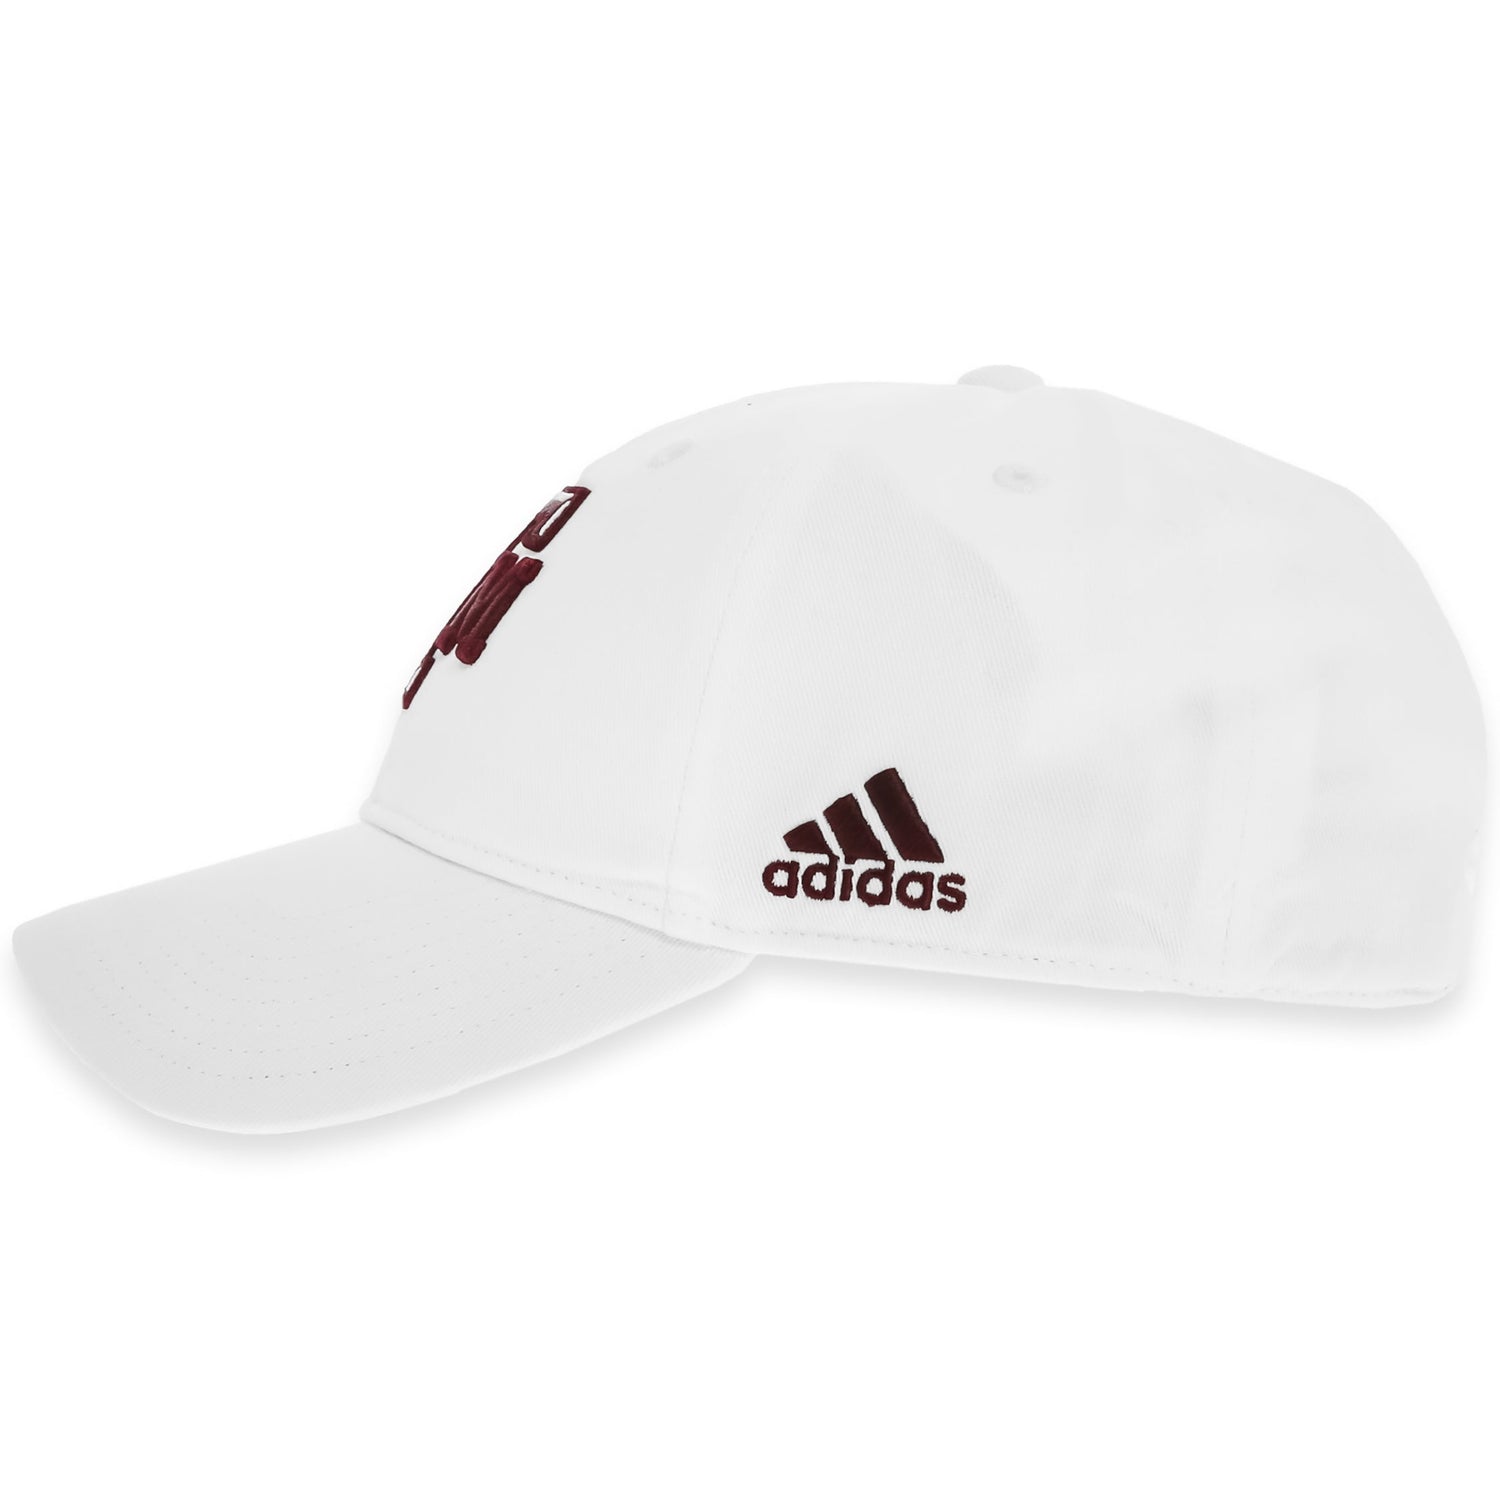 Texas A&M Adidas Cotton Slouch Hat